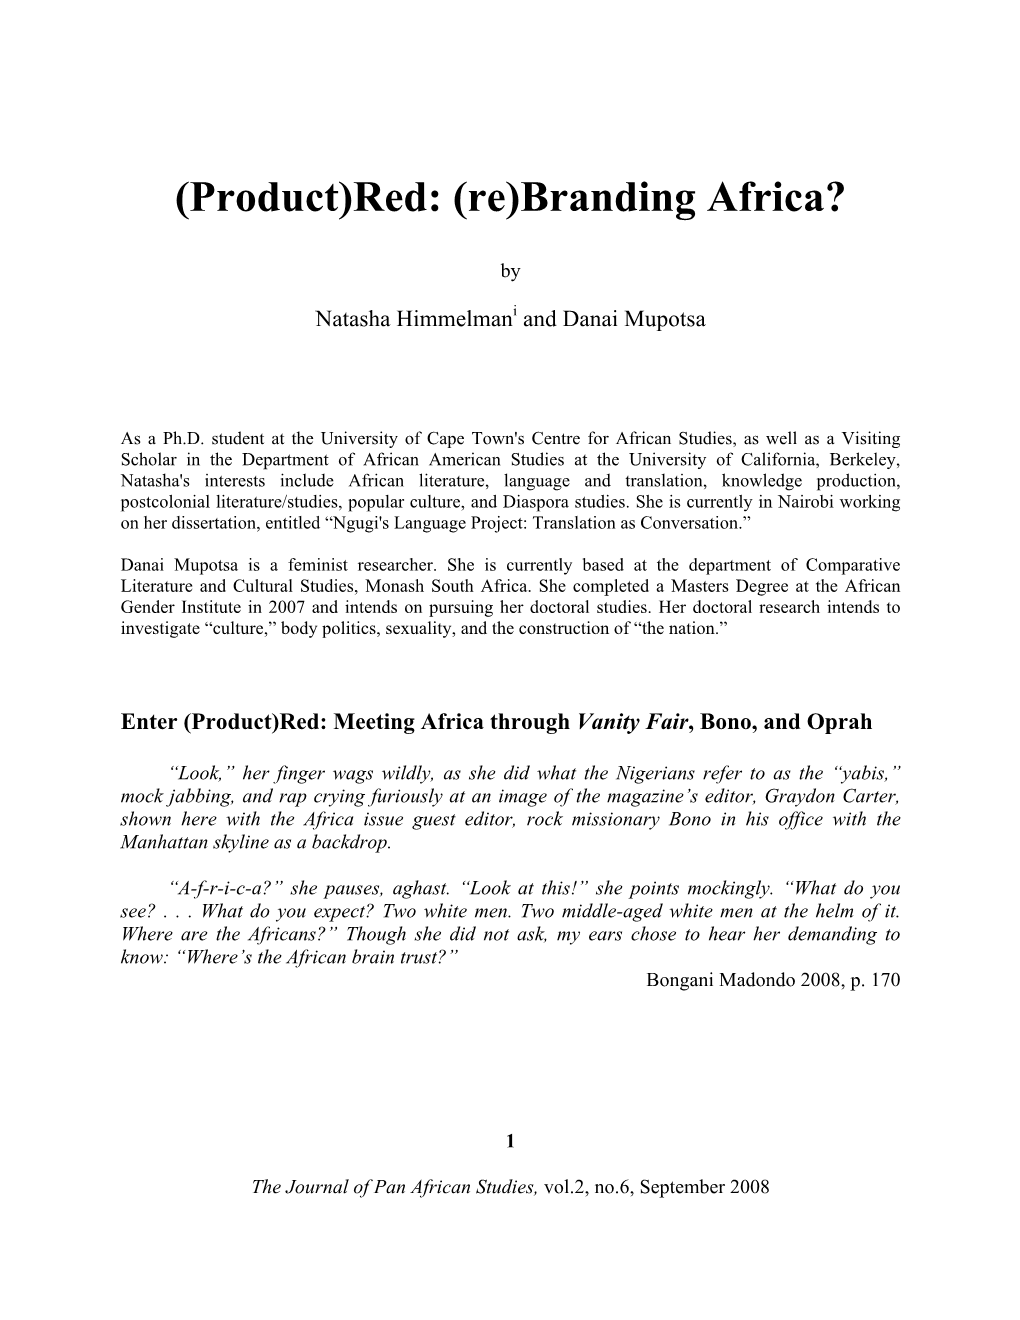 (Product)Red: (Re)Branding Africa?